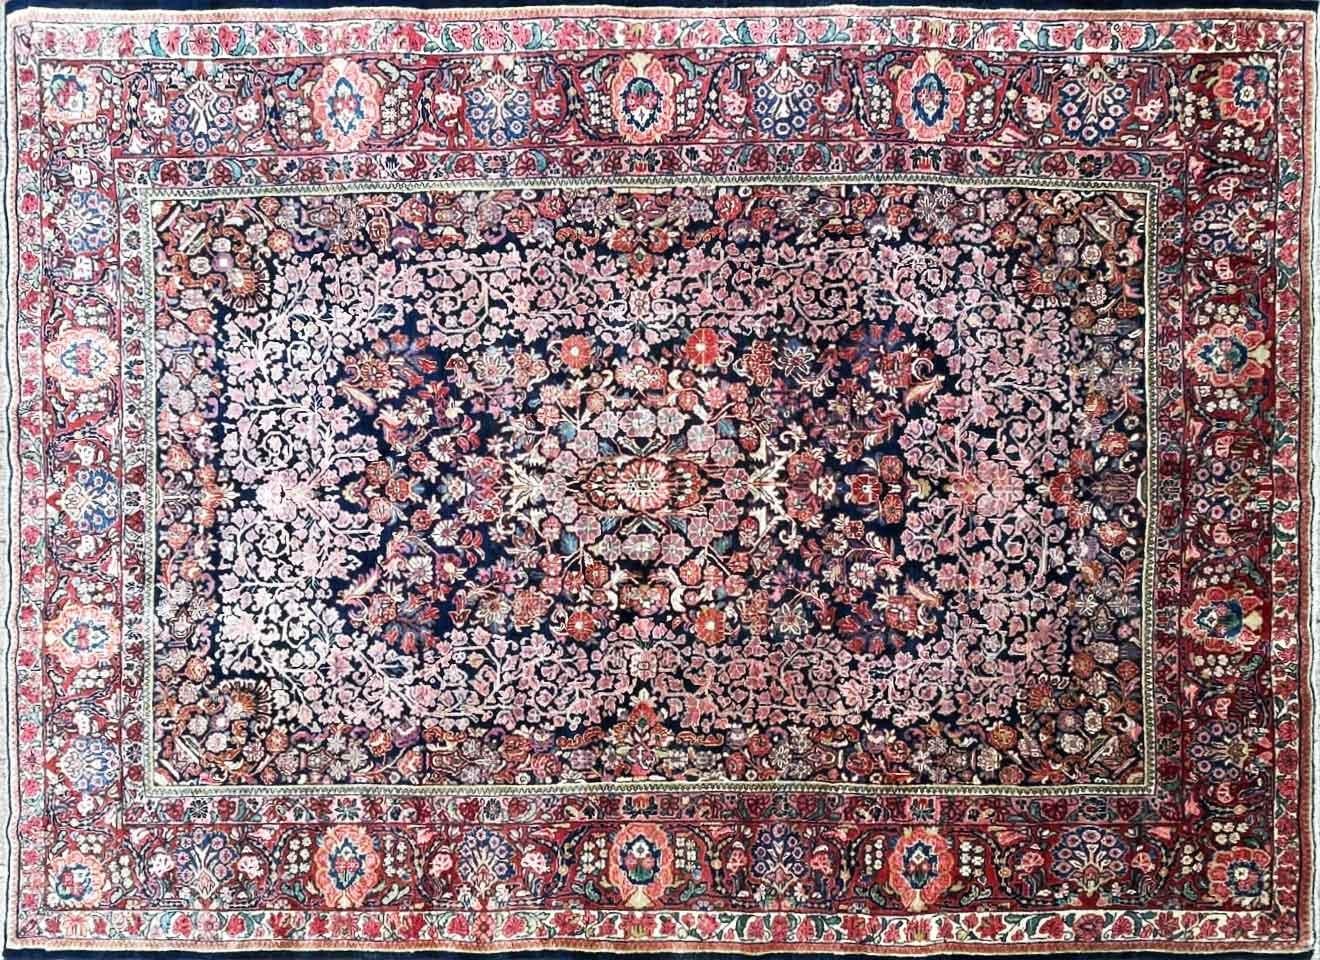 Step into a world of timeless elegance with our captivating Antique Persian Sarouk Carpet, a splendid wedding rug from Northwest Persia. This masterpiece, measuring a generous 8'9